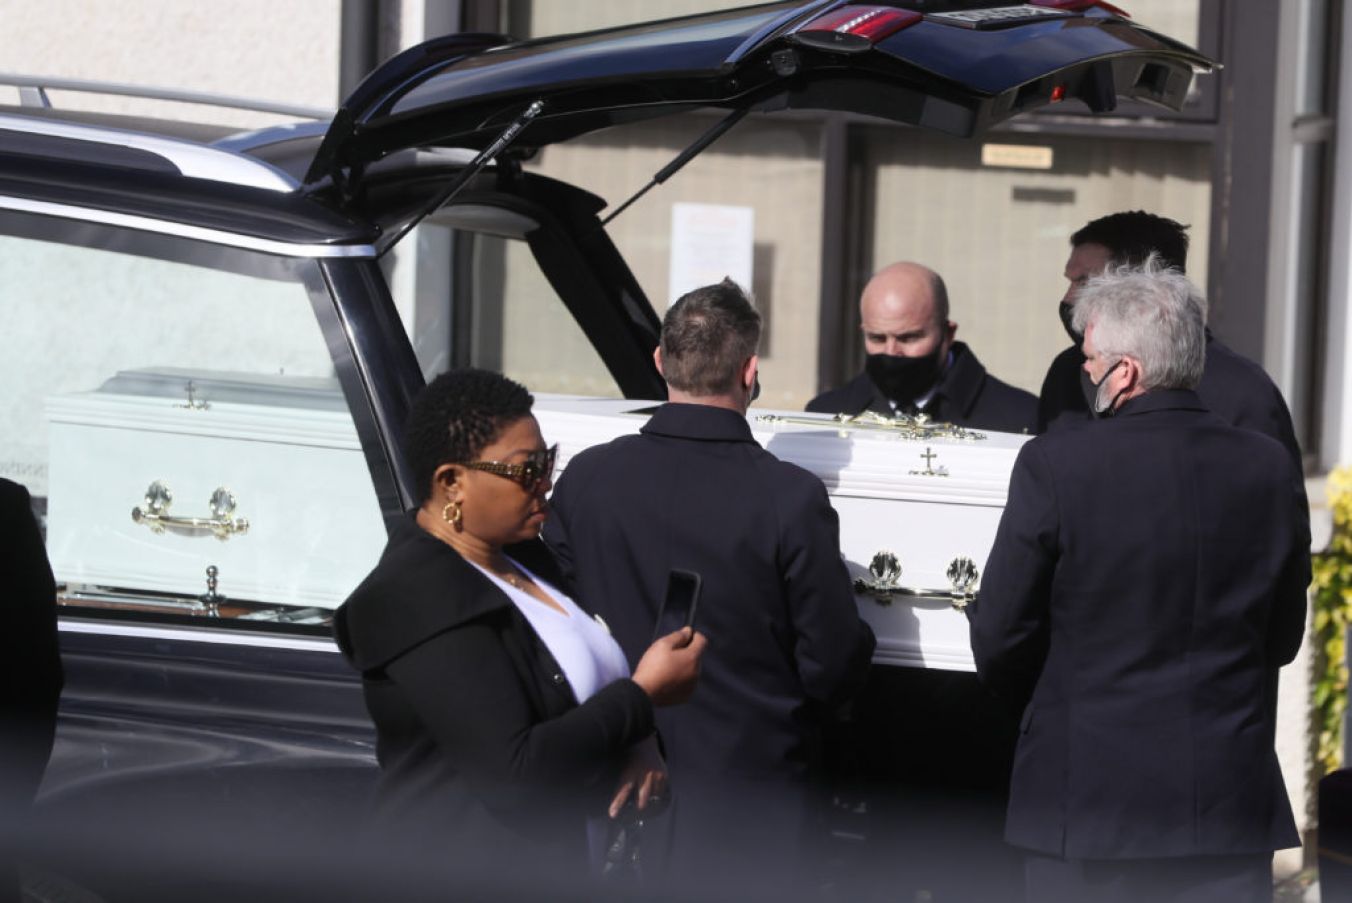 The Coffin Of George Nkencho Is Removed From The Hearse On Arrival At The Sacred Heart Of Jesus Church, Huntstown, Dublin. Photo: Pa